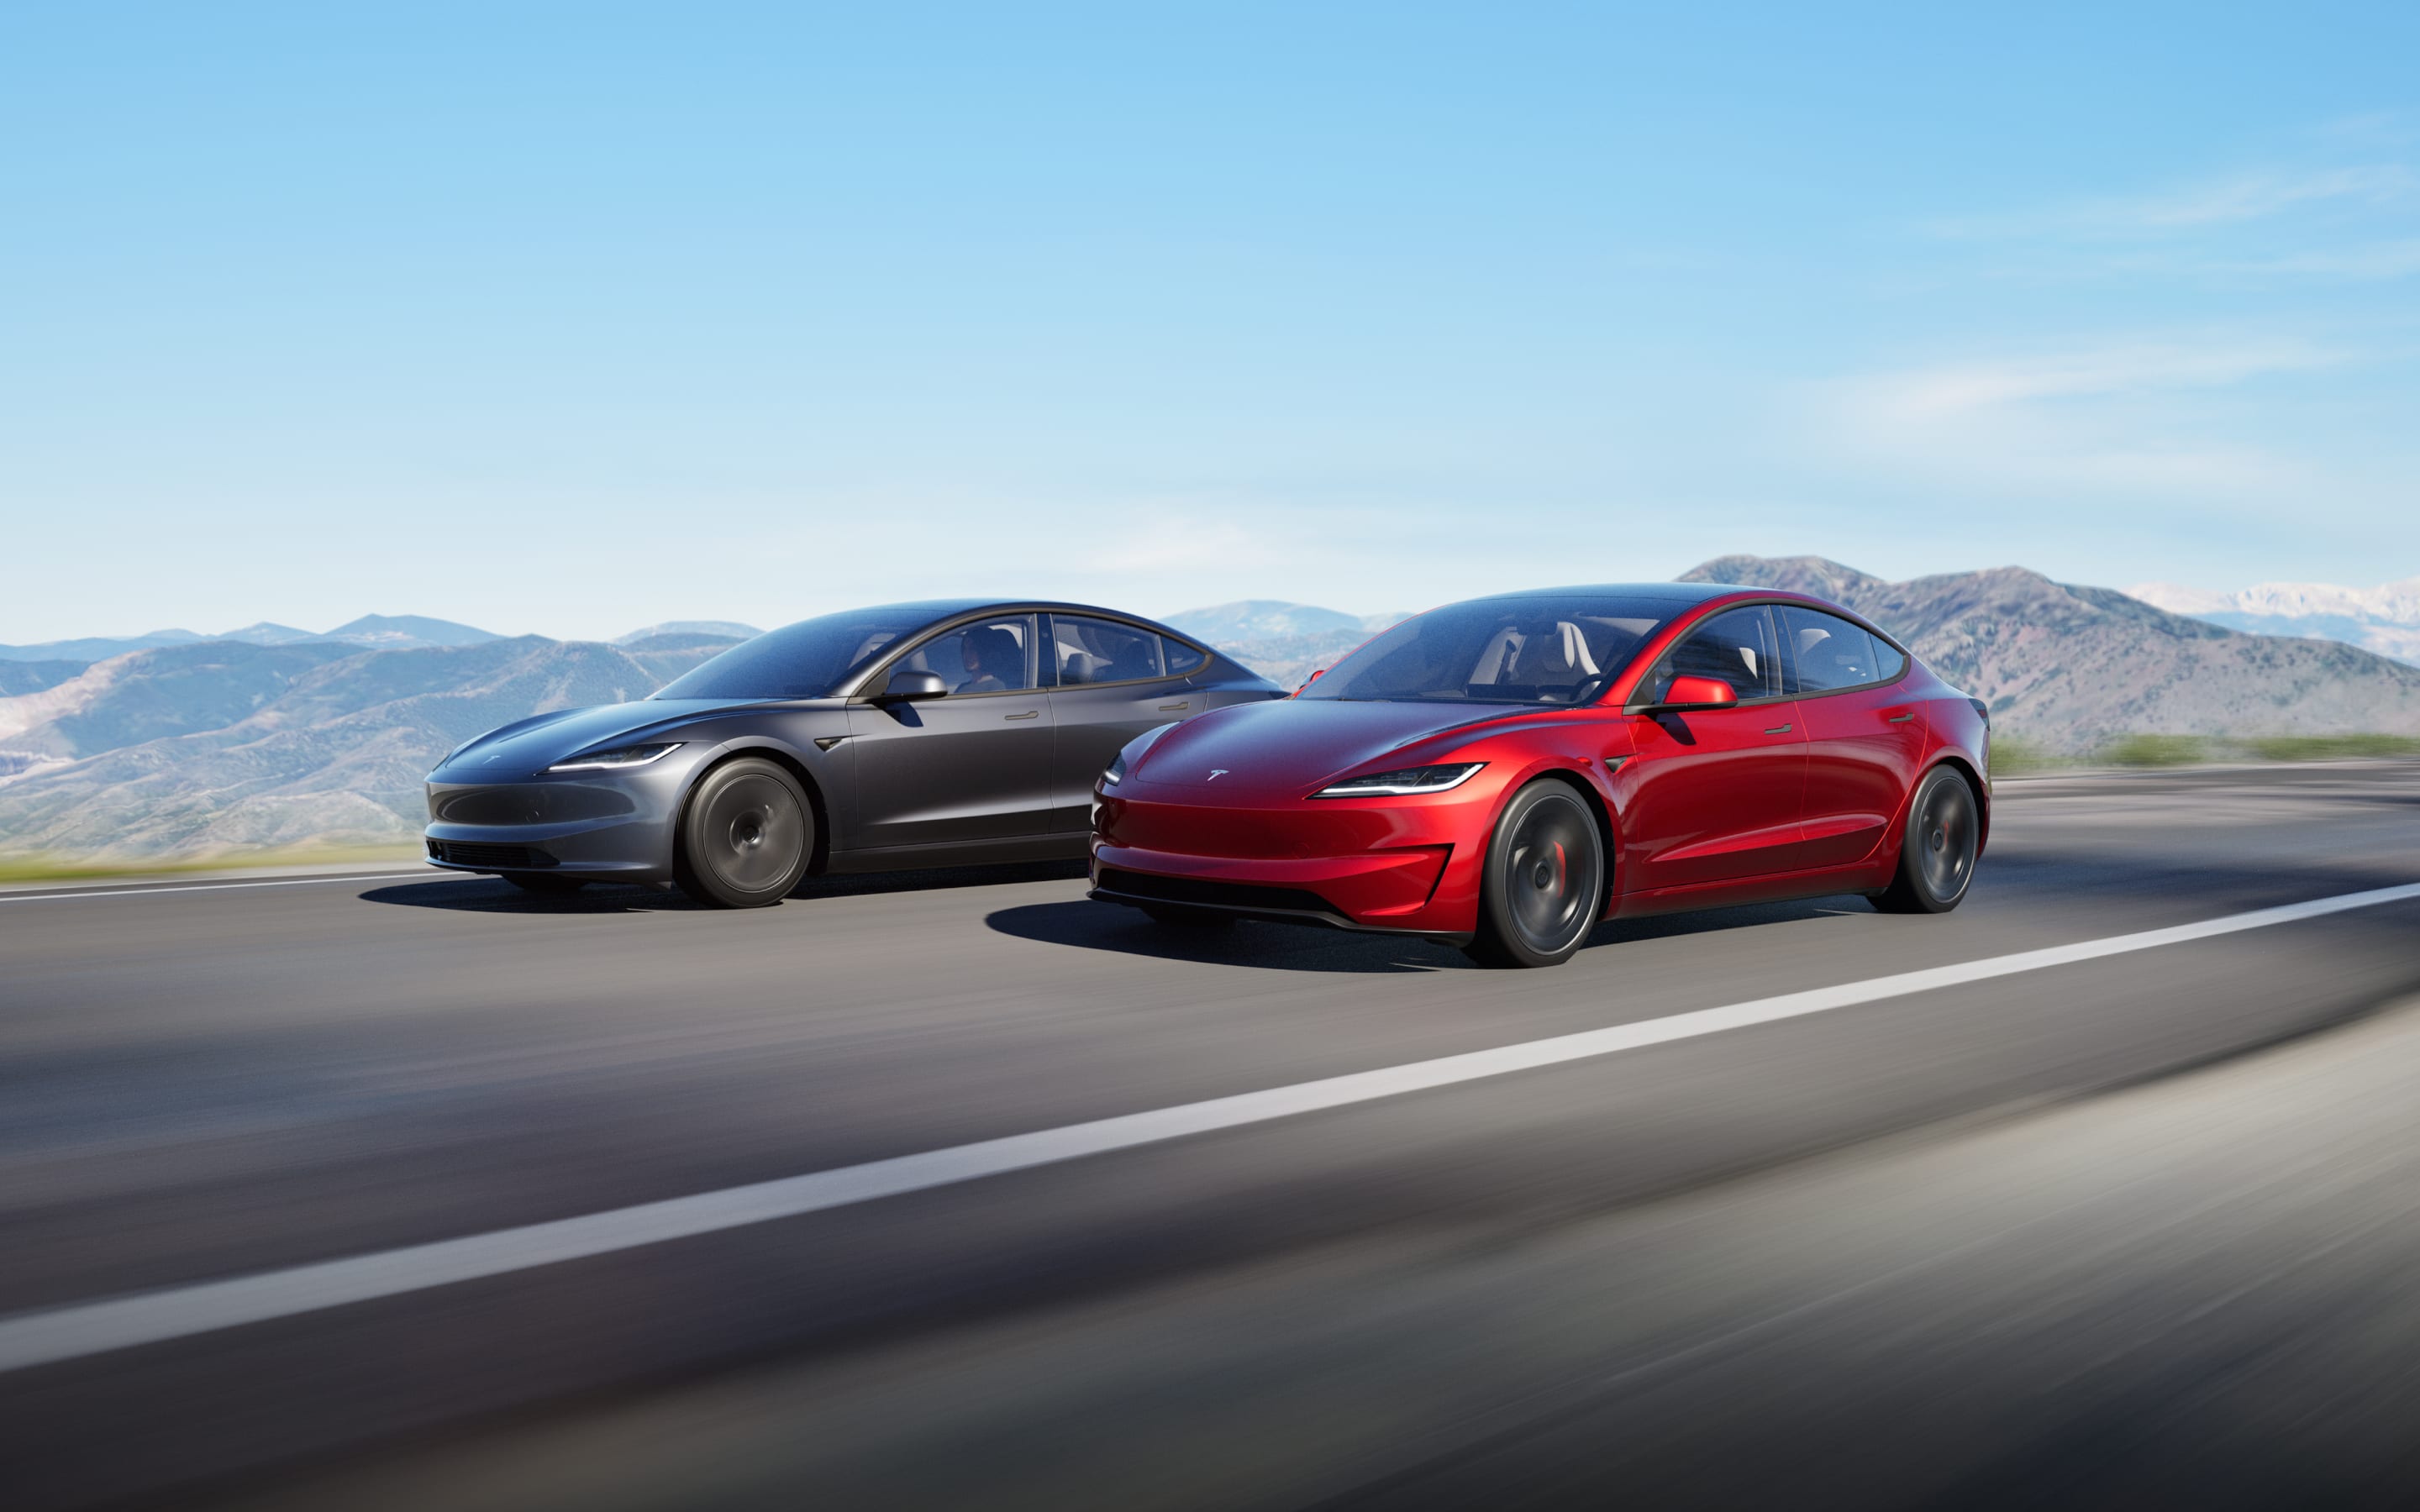 A red Model 3 driving alongside a grey Model 3 on the road with mountains in the background